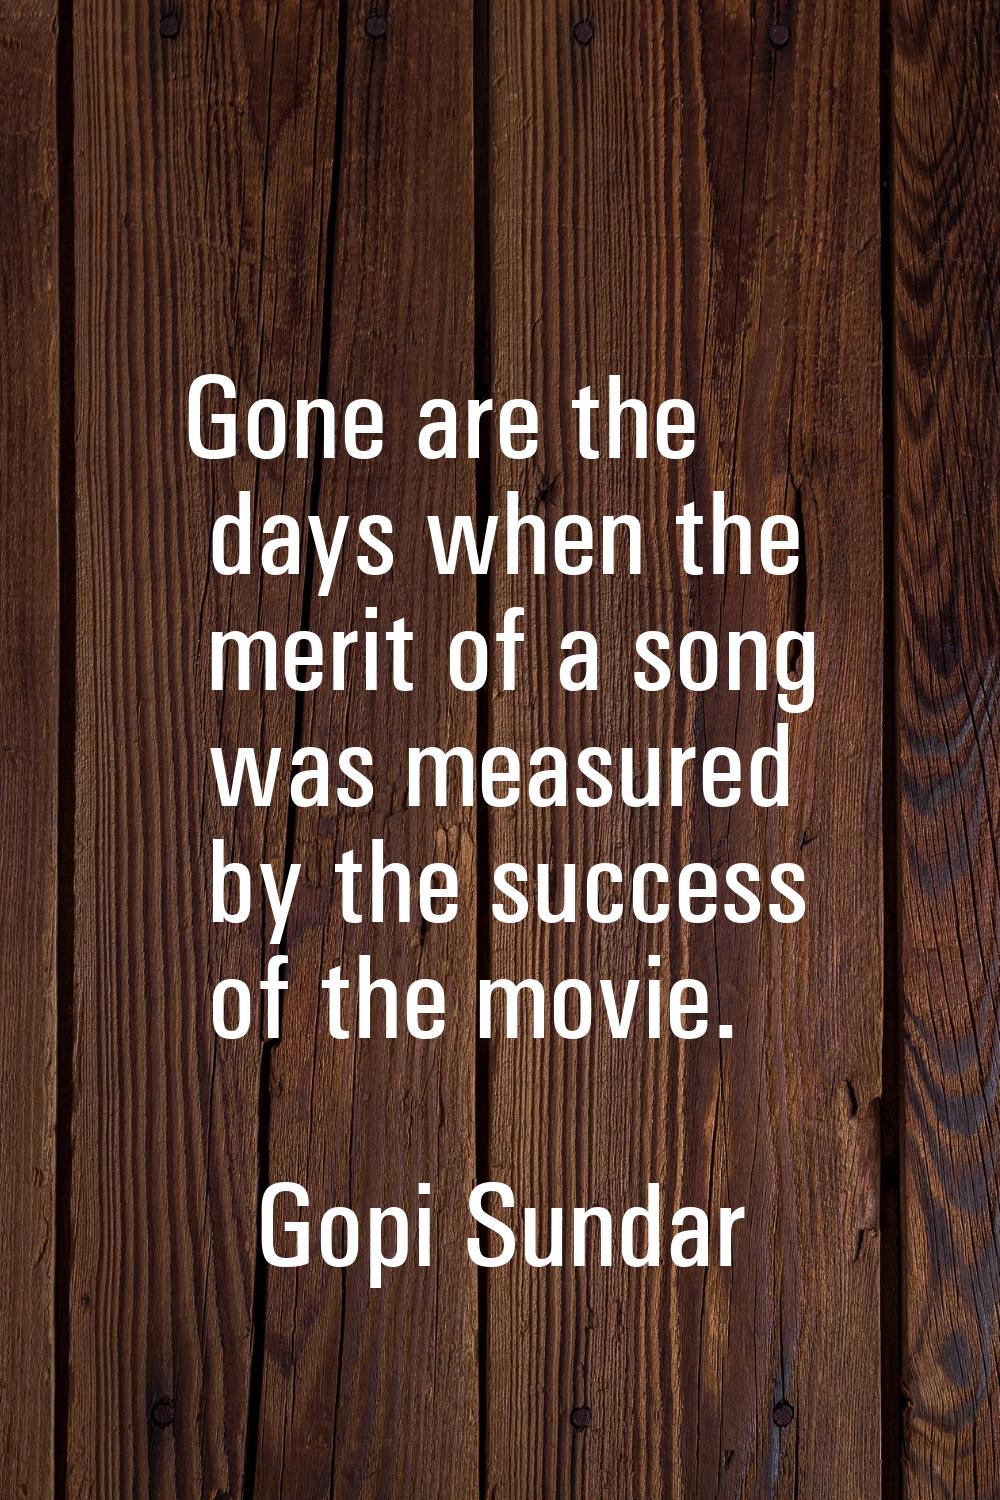 Gone are the days when the merit of a song was measured by the success of the movie.